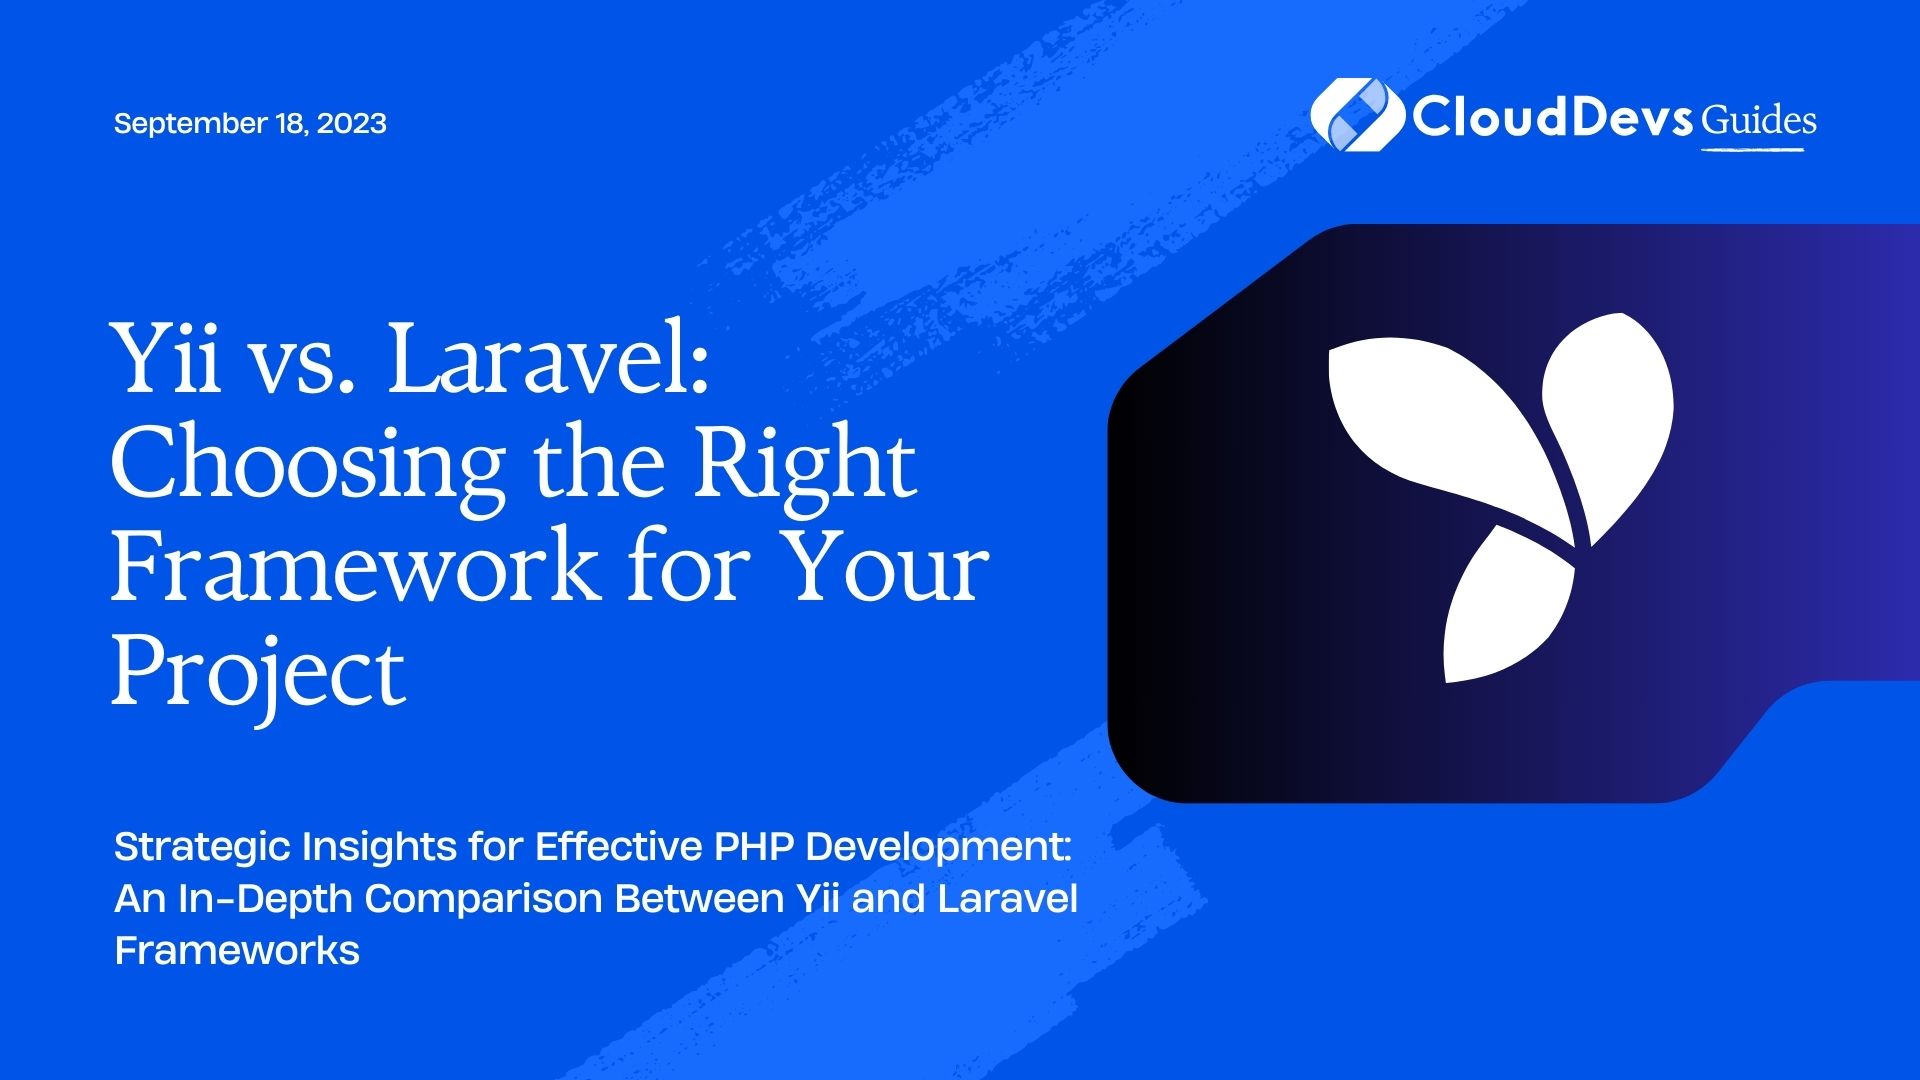 Yii vs. Laravel: Choosing the Right Framework for Your Project